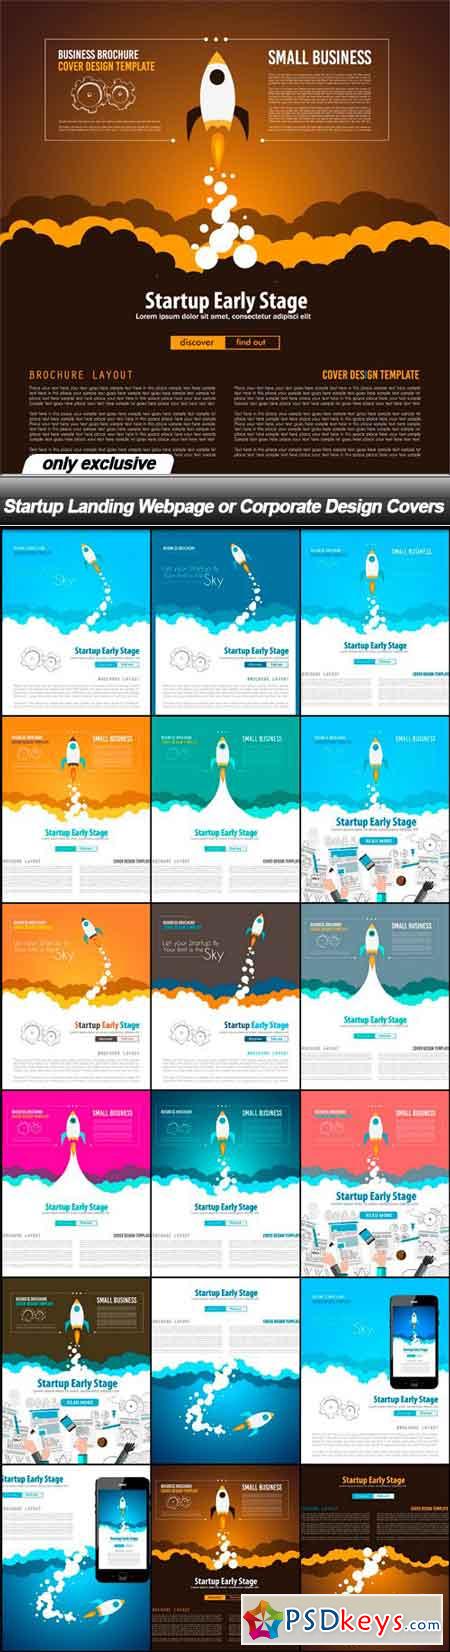 Startup Landing Webpage or Corporate Design Covers - 18 EPS